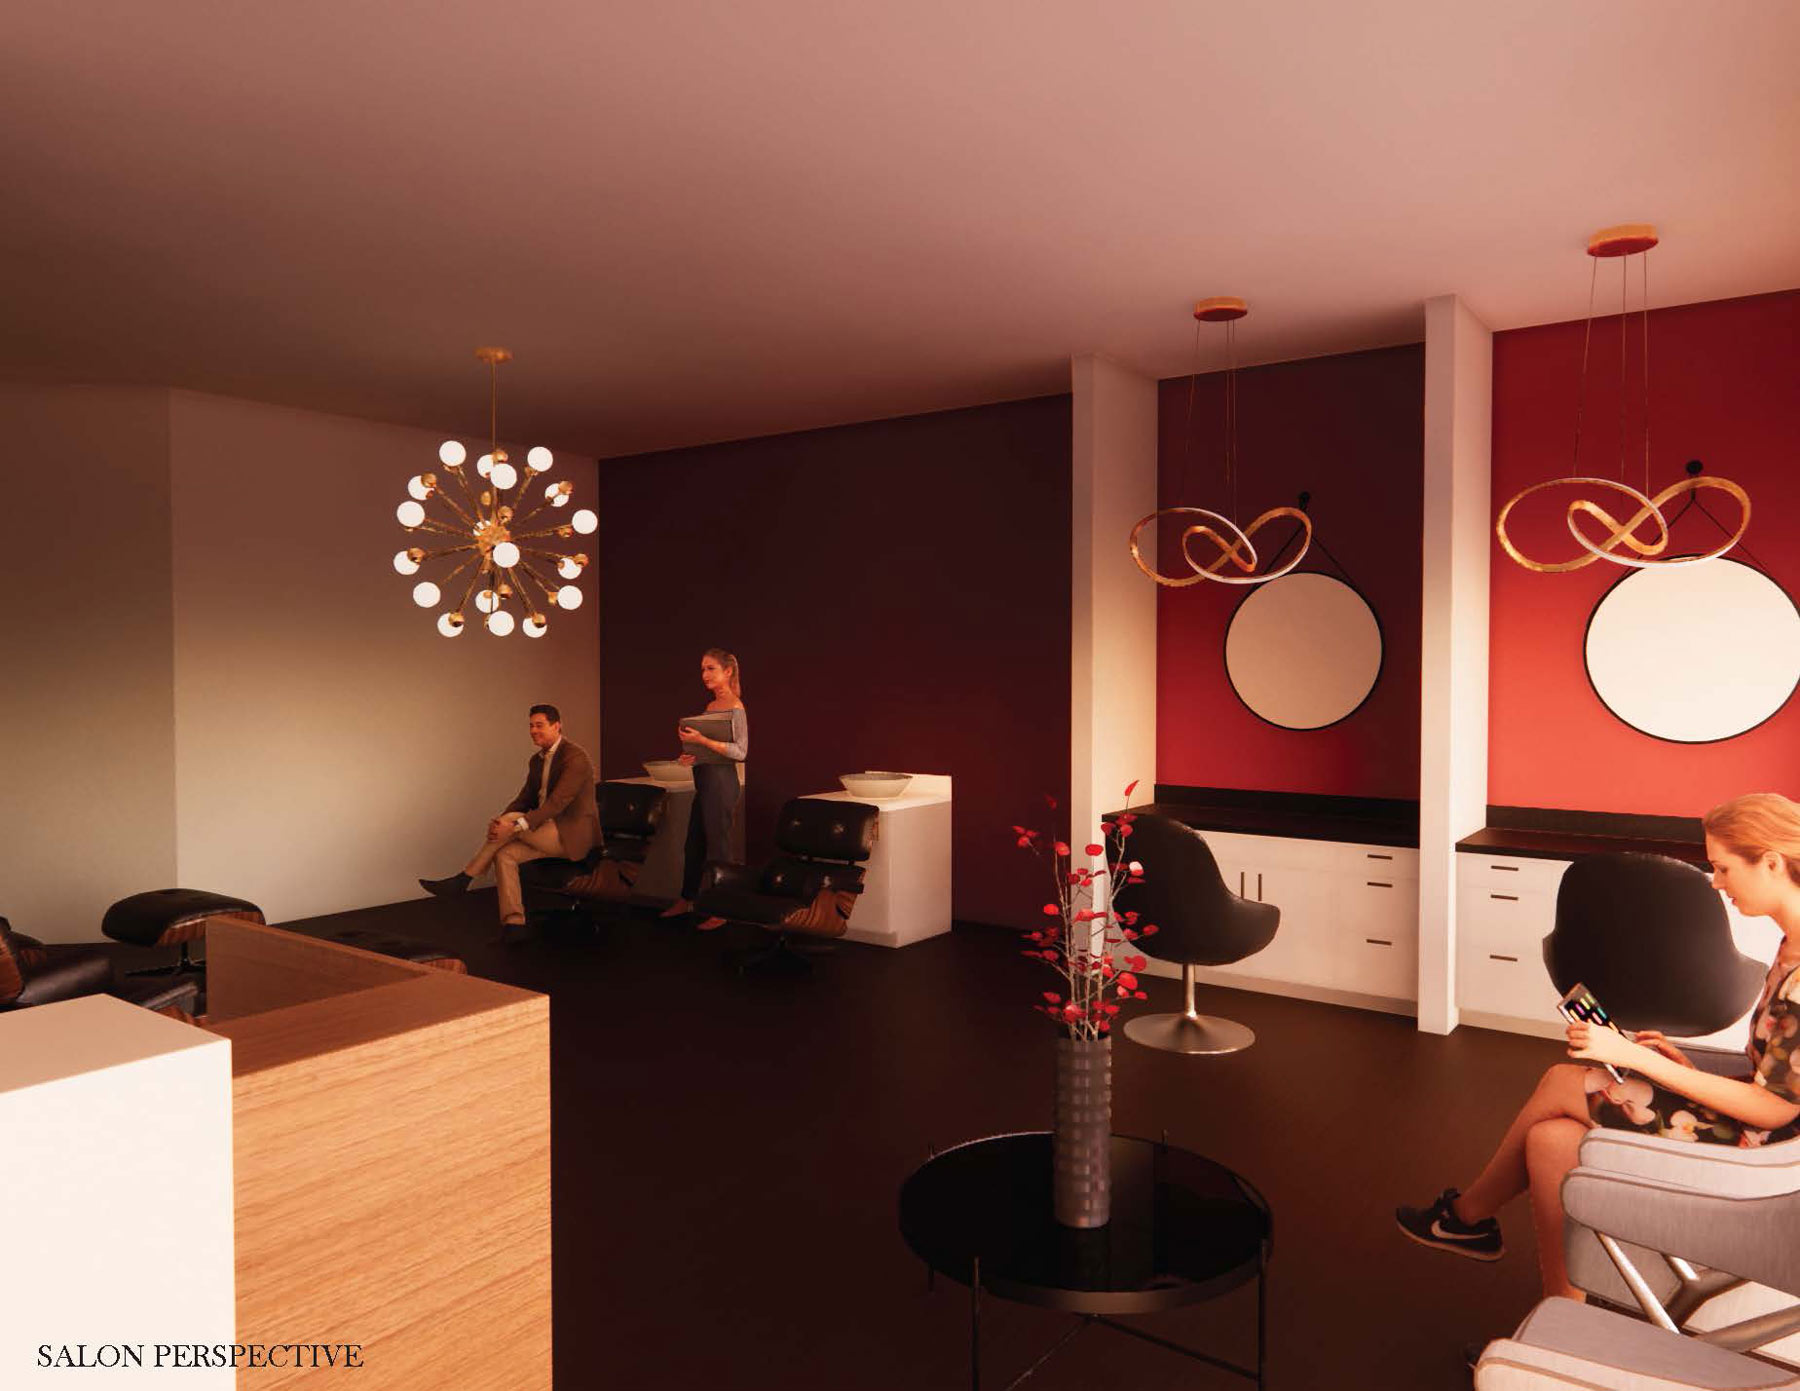 The bottom left of this phot reads &quot;salon perspective&quot;. This room is dark with white walls and ceiling, besides one wall which is red. On the red wall are different sectioned off stations with mirrors, chairs, and drawers. There are complex light fixtures hanging from the ceiling, and people are scattered throughout the room.